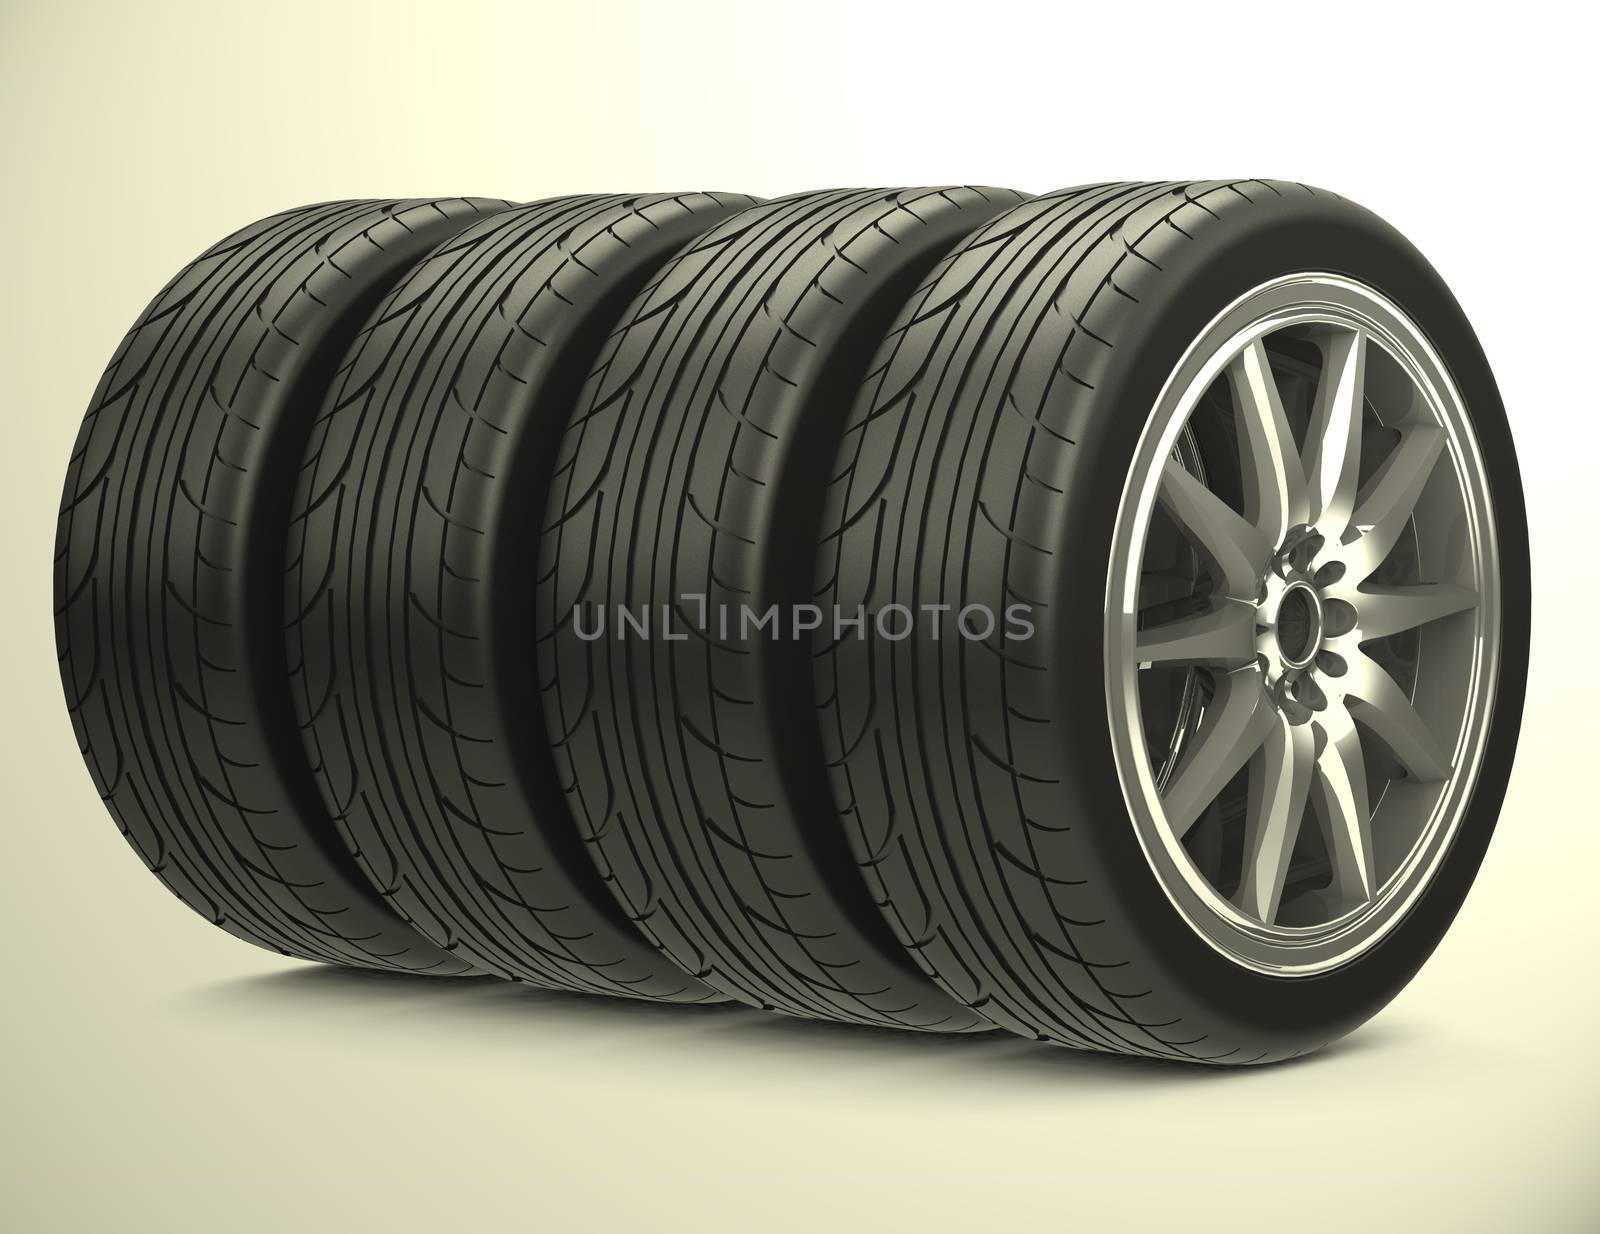 3d generated picture of car tires